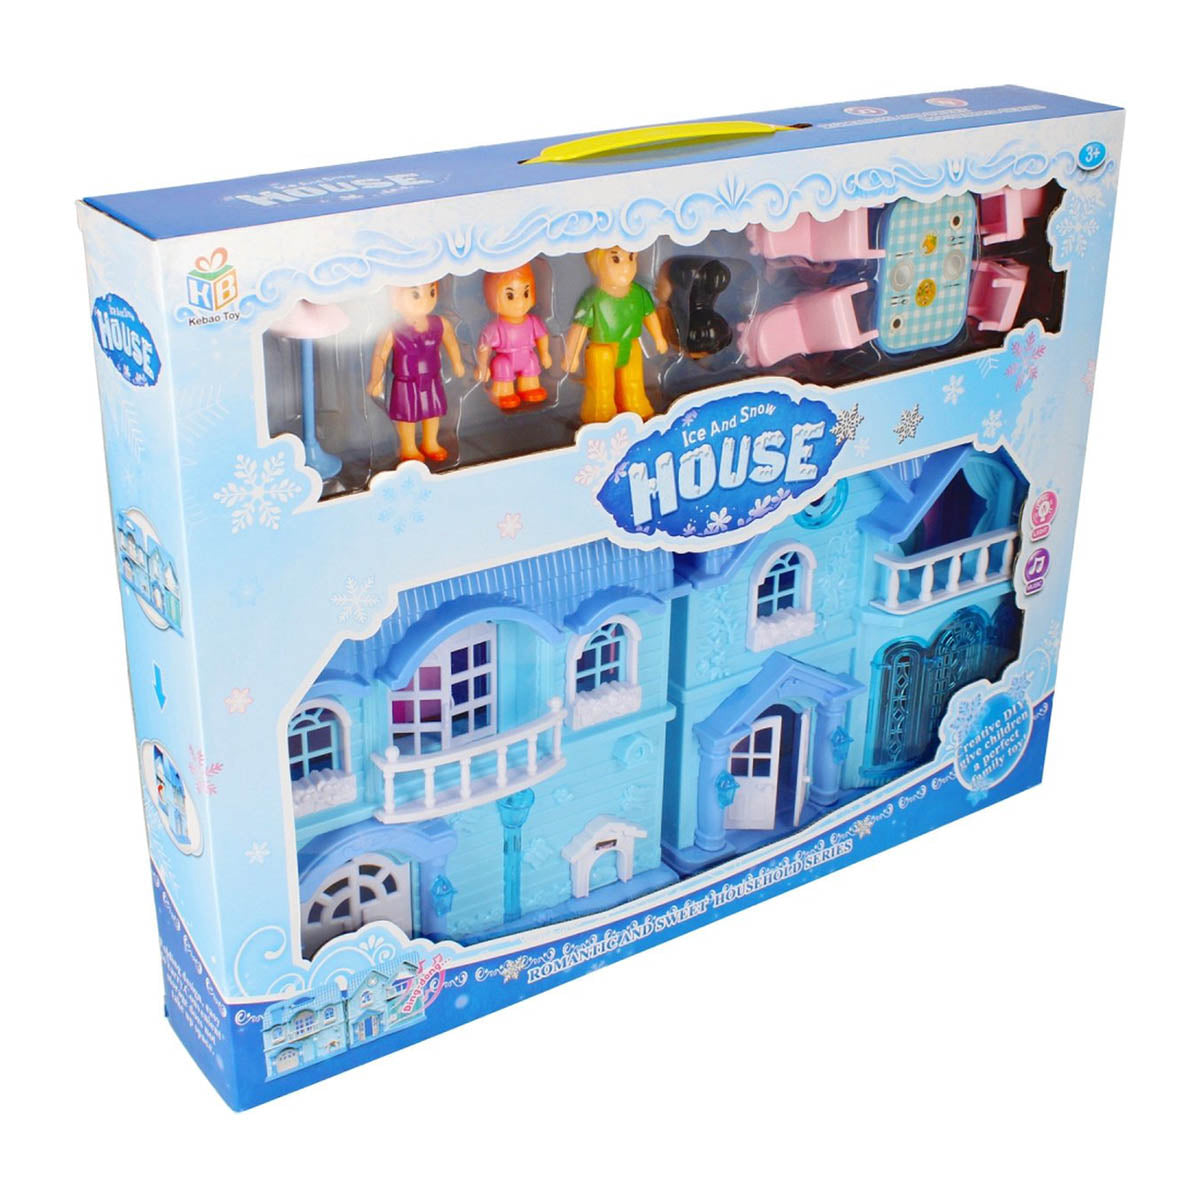 <tc>Ariko</tc> Poppenhuis My New Home Snow and Ice Series - Medium - Music and Light show - including garden map and kitchen and bedroom furniture - including 2 x AA batteries from Philips